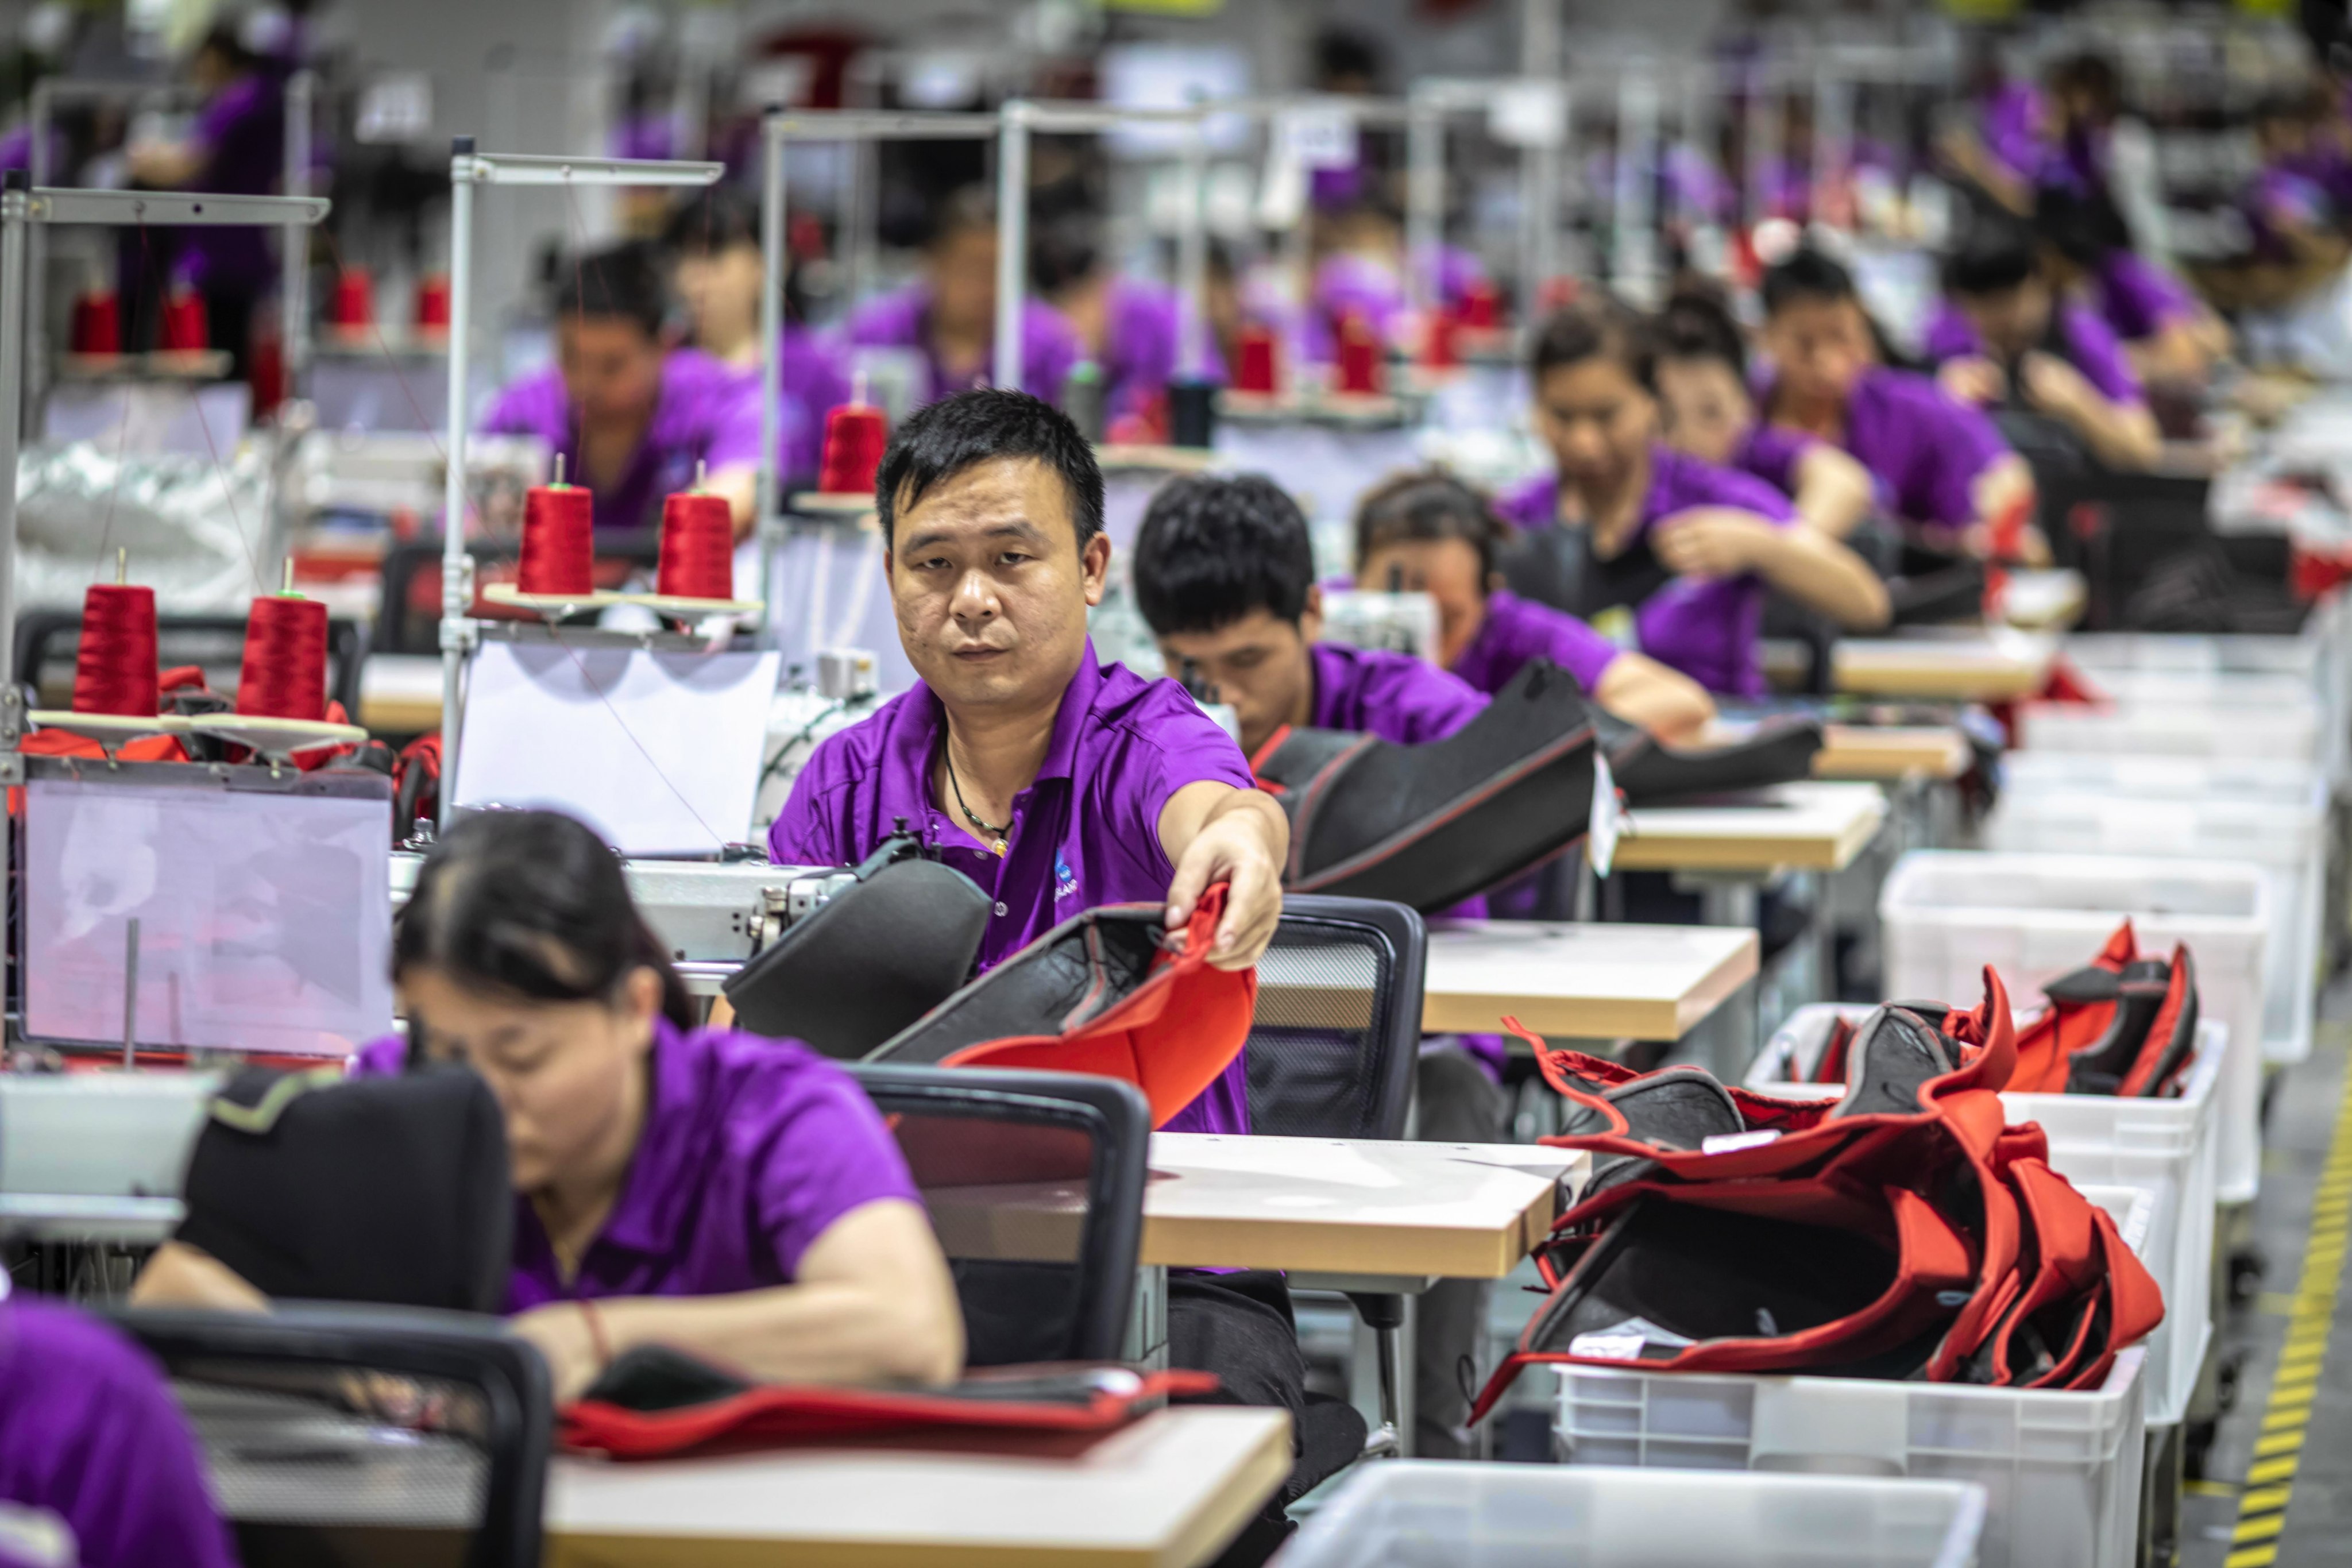 Production in Dongguan, a major manufacturing hub, is being encouraged through a number of subsidies. Photo: EPA-EFE